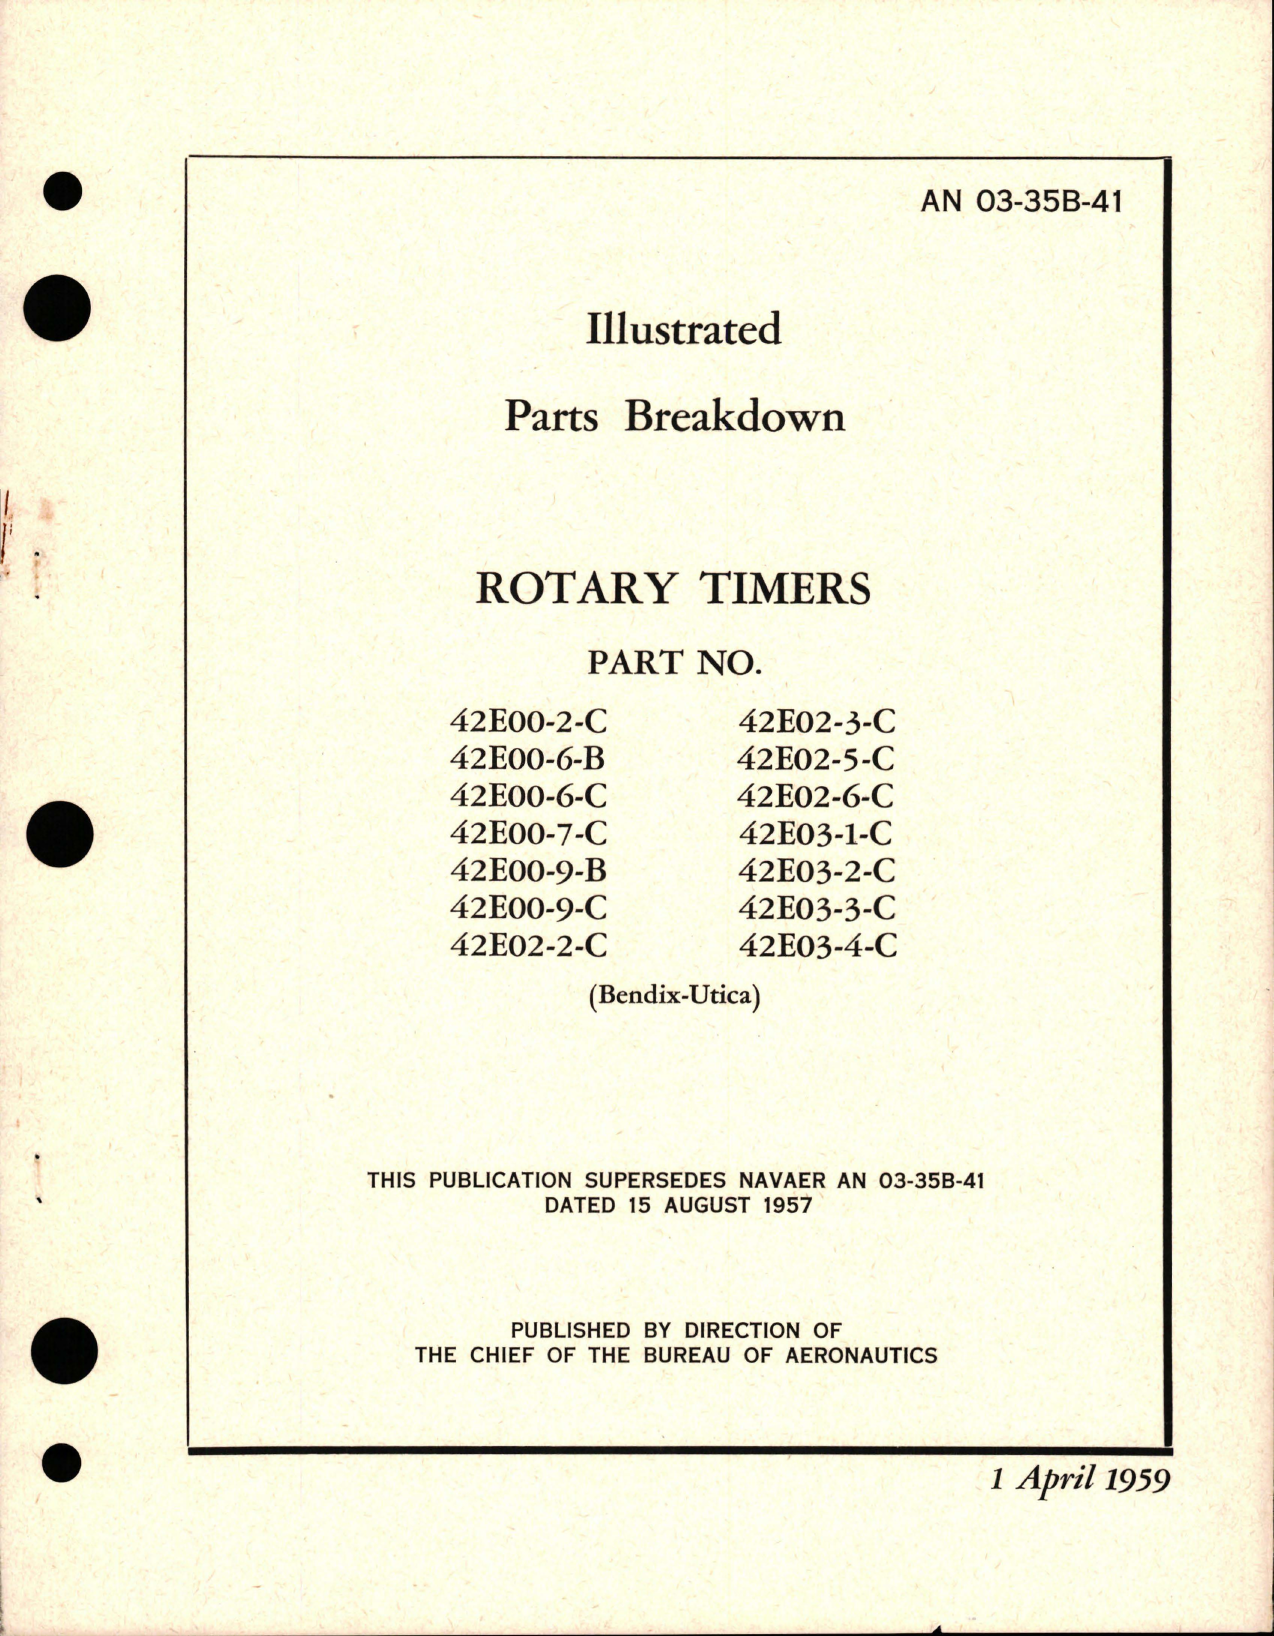 Sample page 1 from AirCorps Library document: Illustrated Parts Breakdown for Rotary Timers - Parts 42E00, 42E02, and 42E03 Series